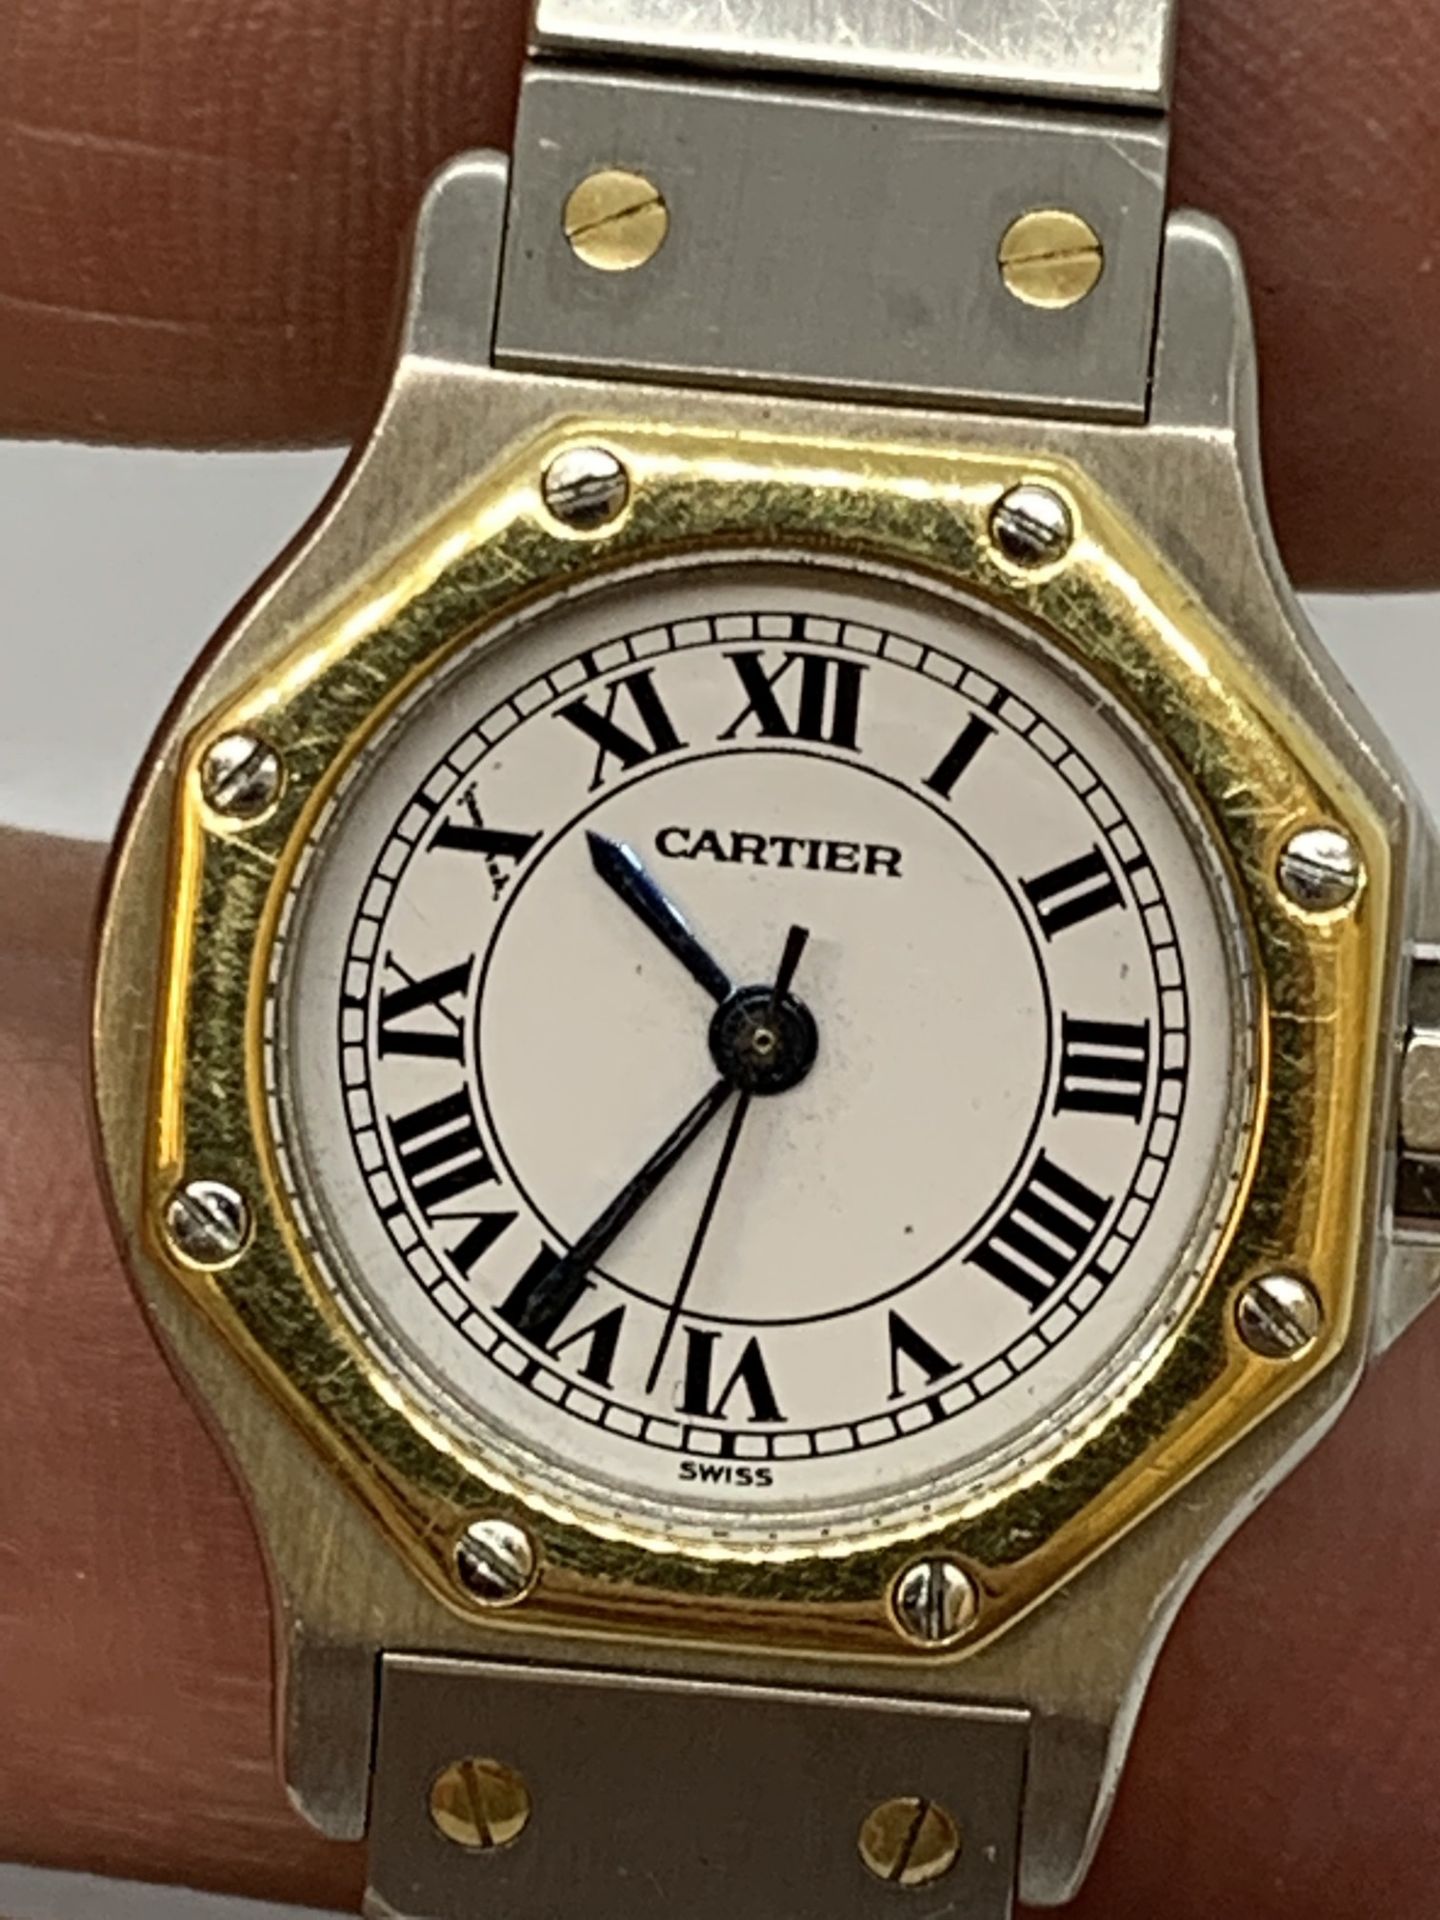 CARTIER STEEL & 18ct GOLD AUTOMATIC WATCH - Image 8 of 8